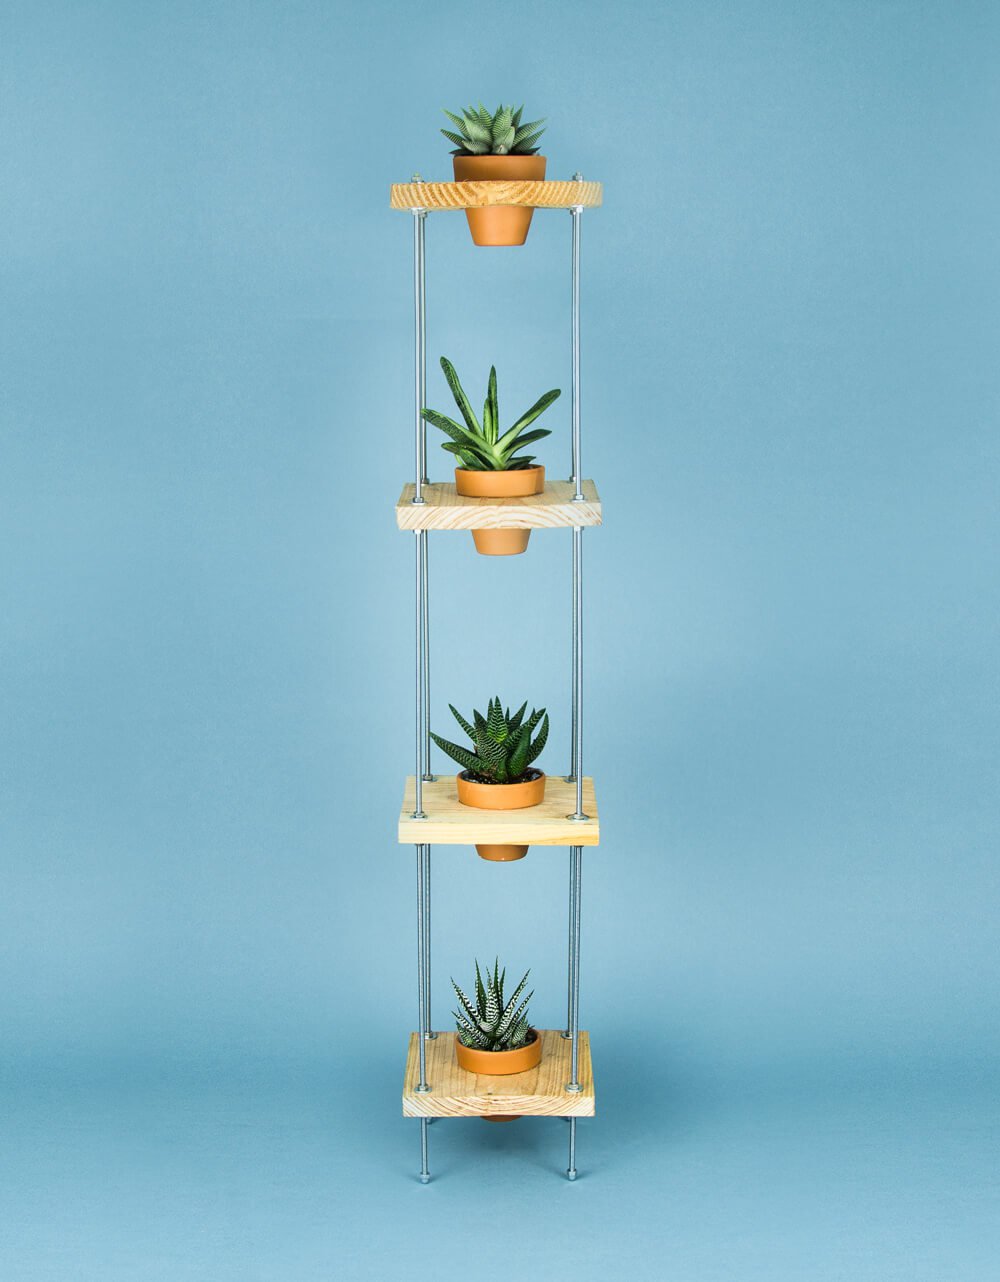 make a plant tower